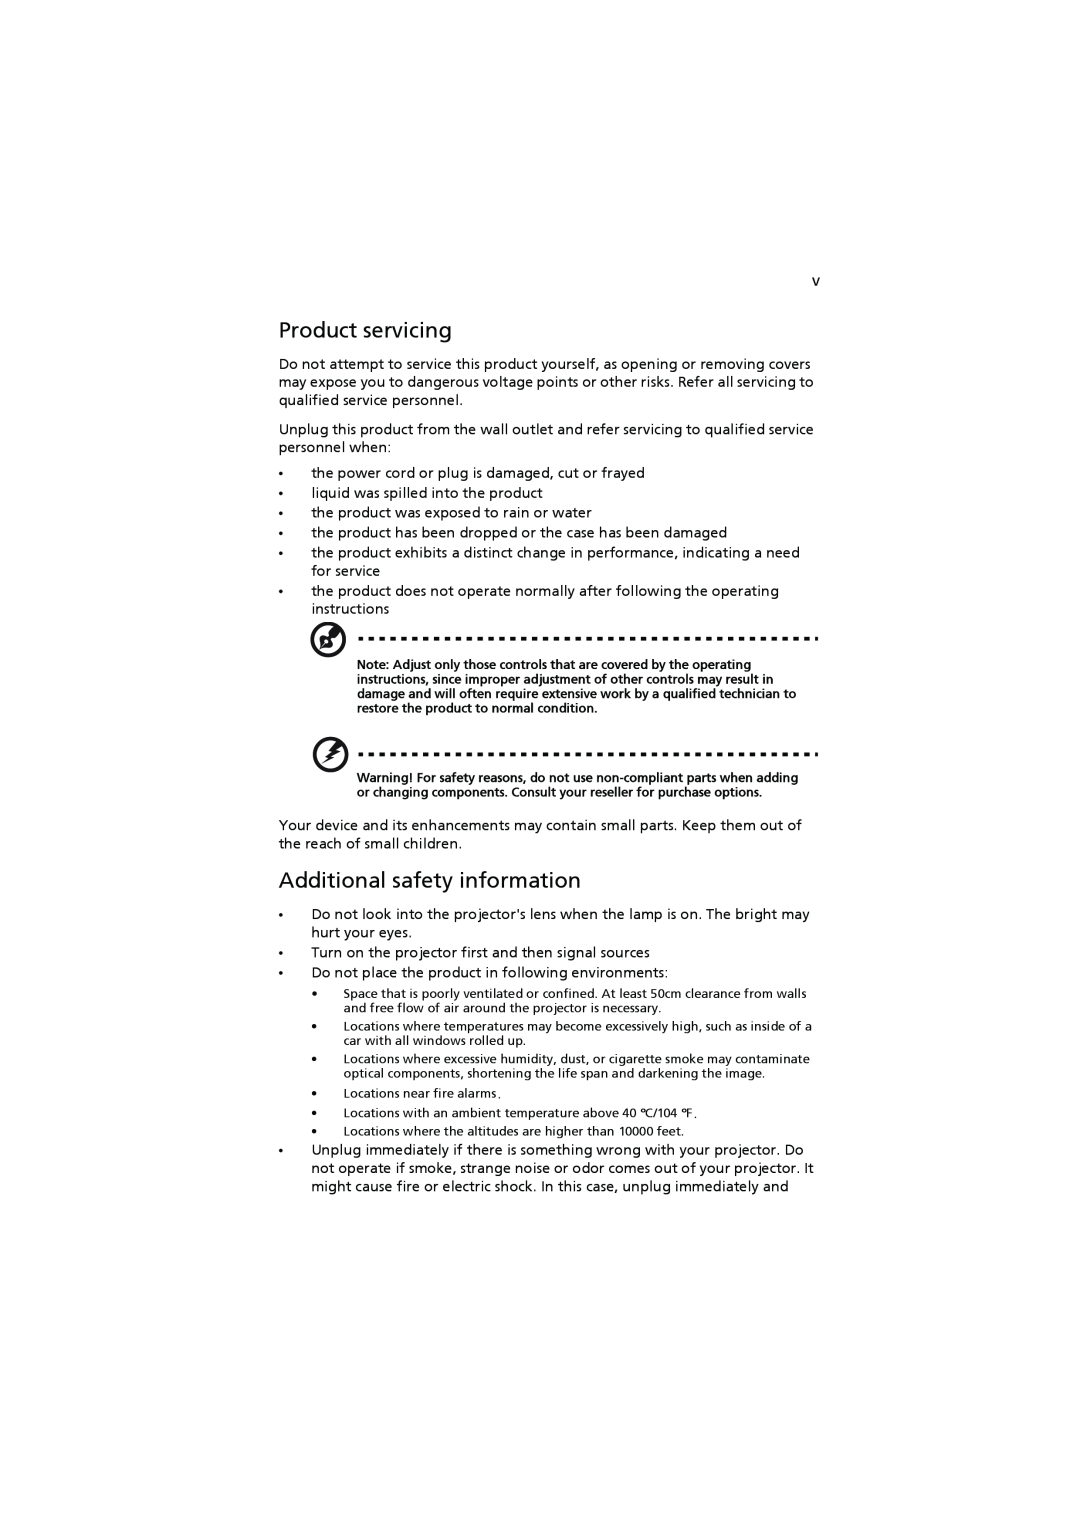 Acer H7531D manual Product servicing, Additional safety information 